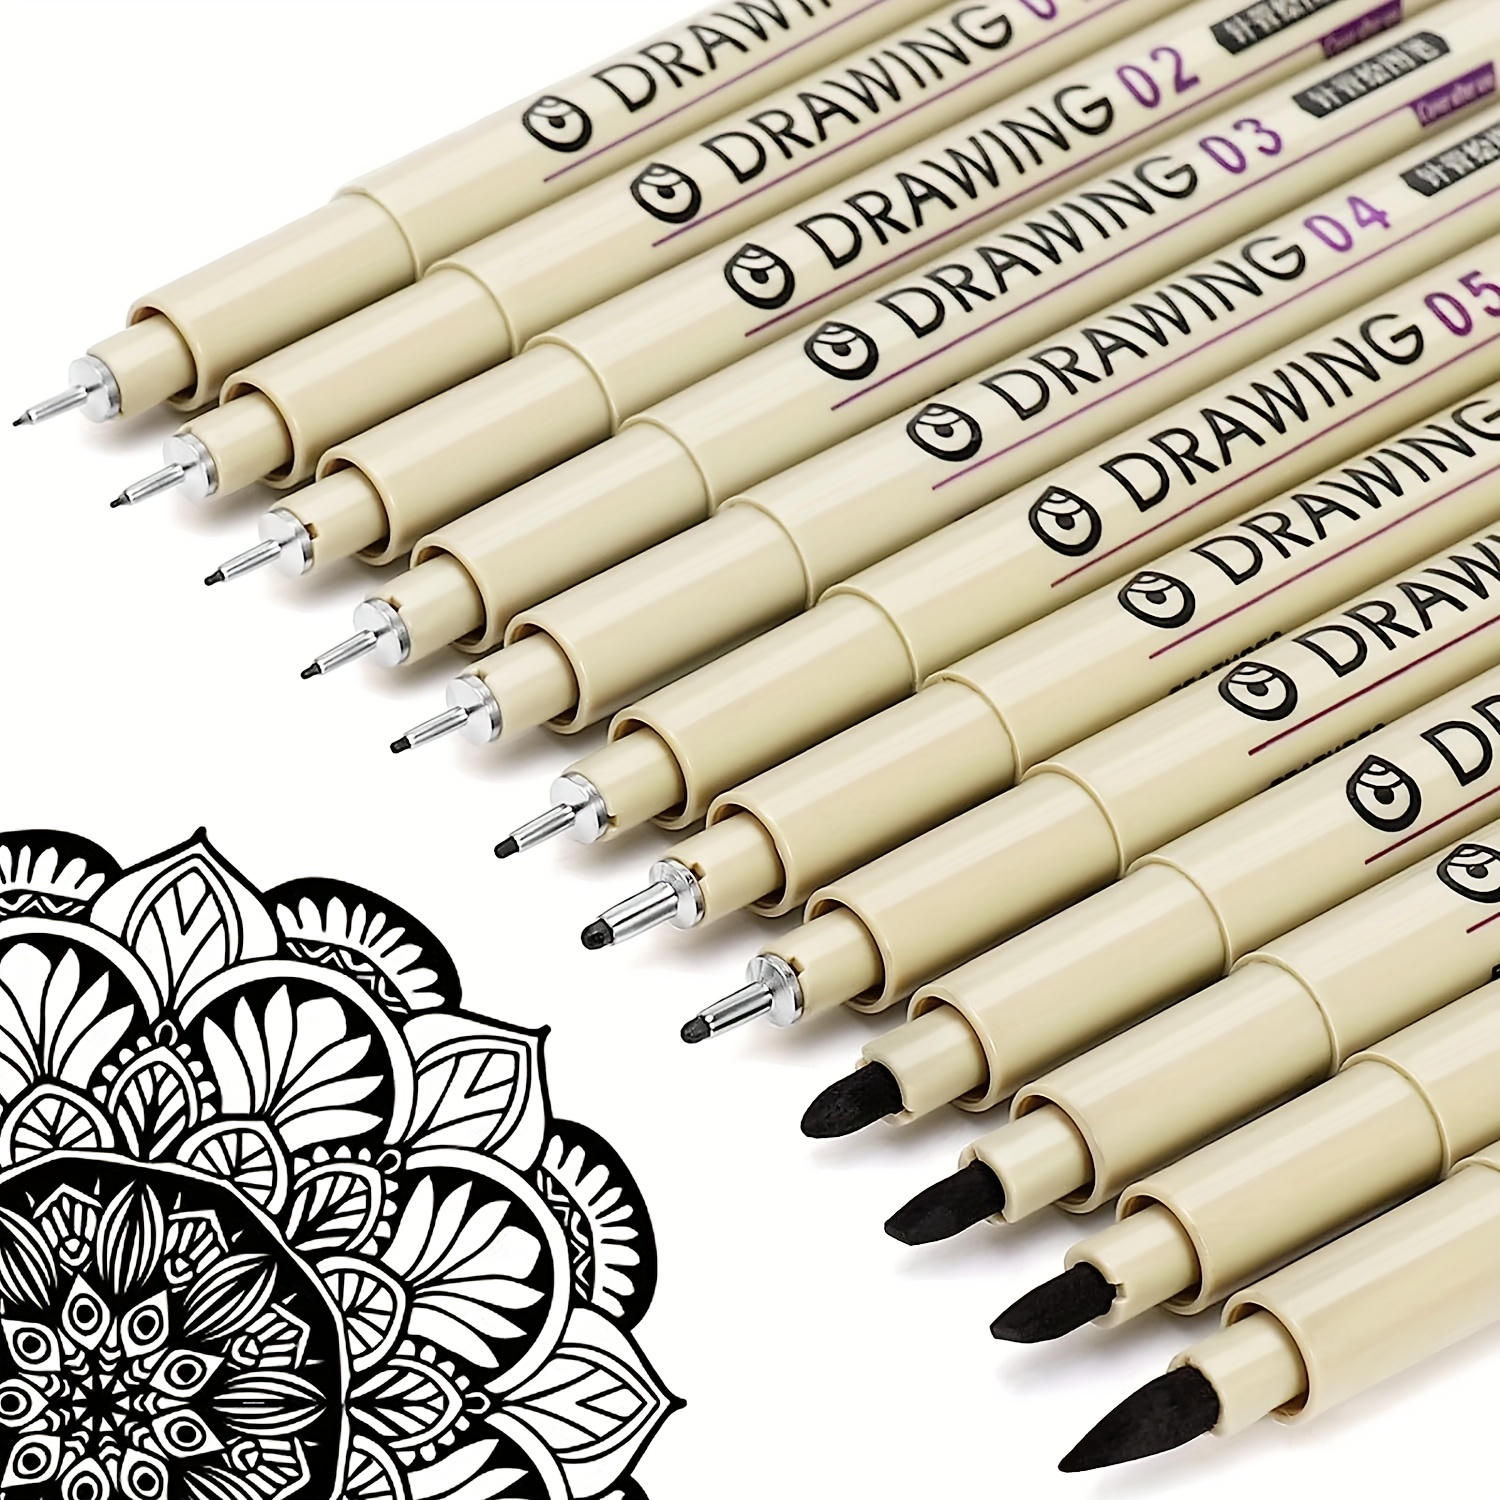 SAKURA Pigma Micron Fineliner Pens - Archival Black Ink Pens - Pens for  Writing, Drawing, or Journaling - Assorted Point Sizes - 6 Pack